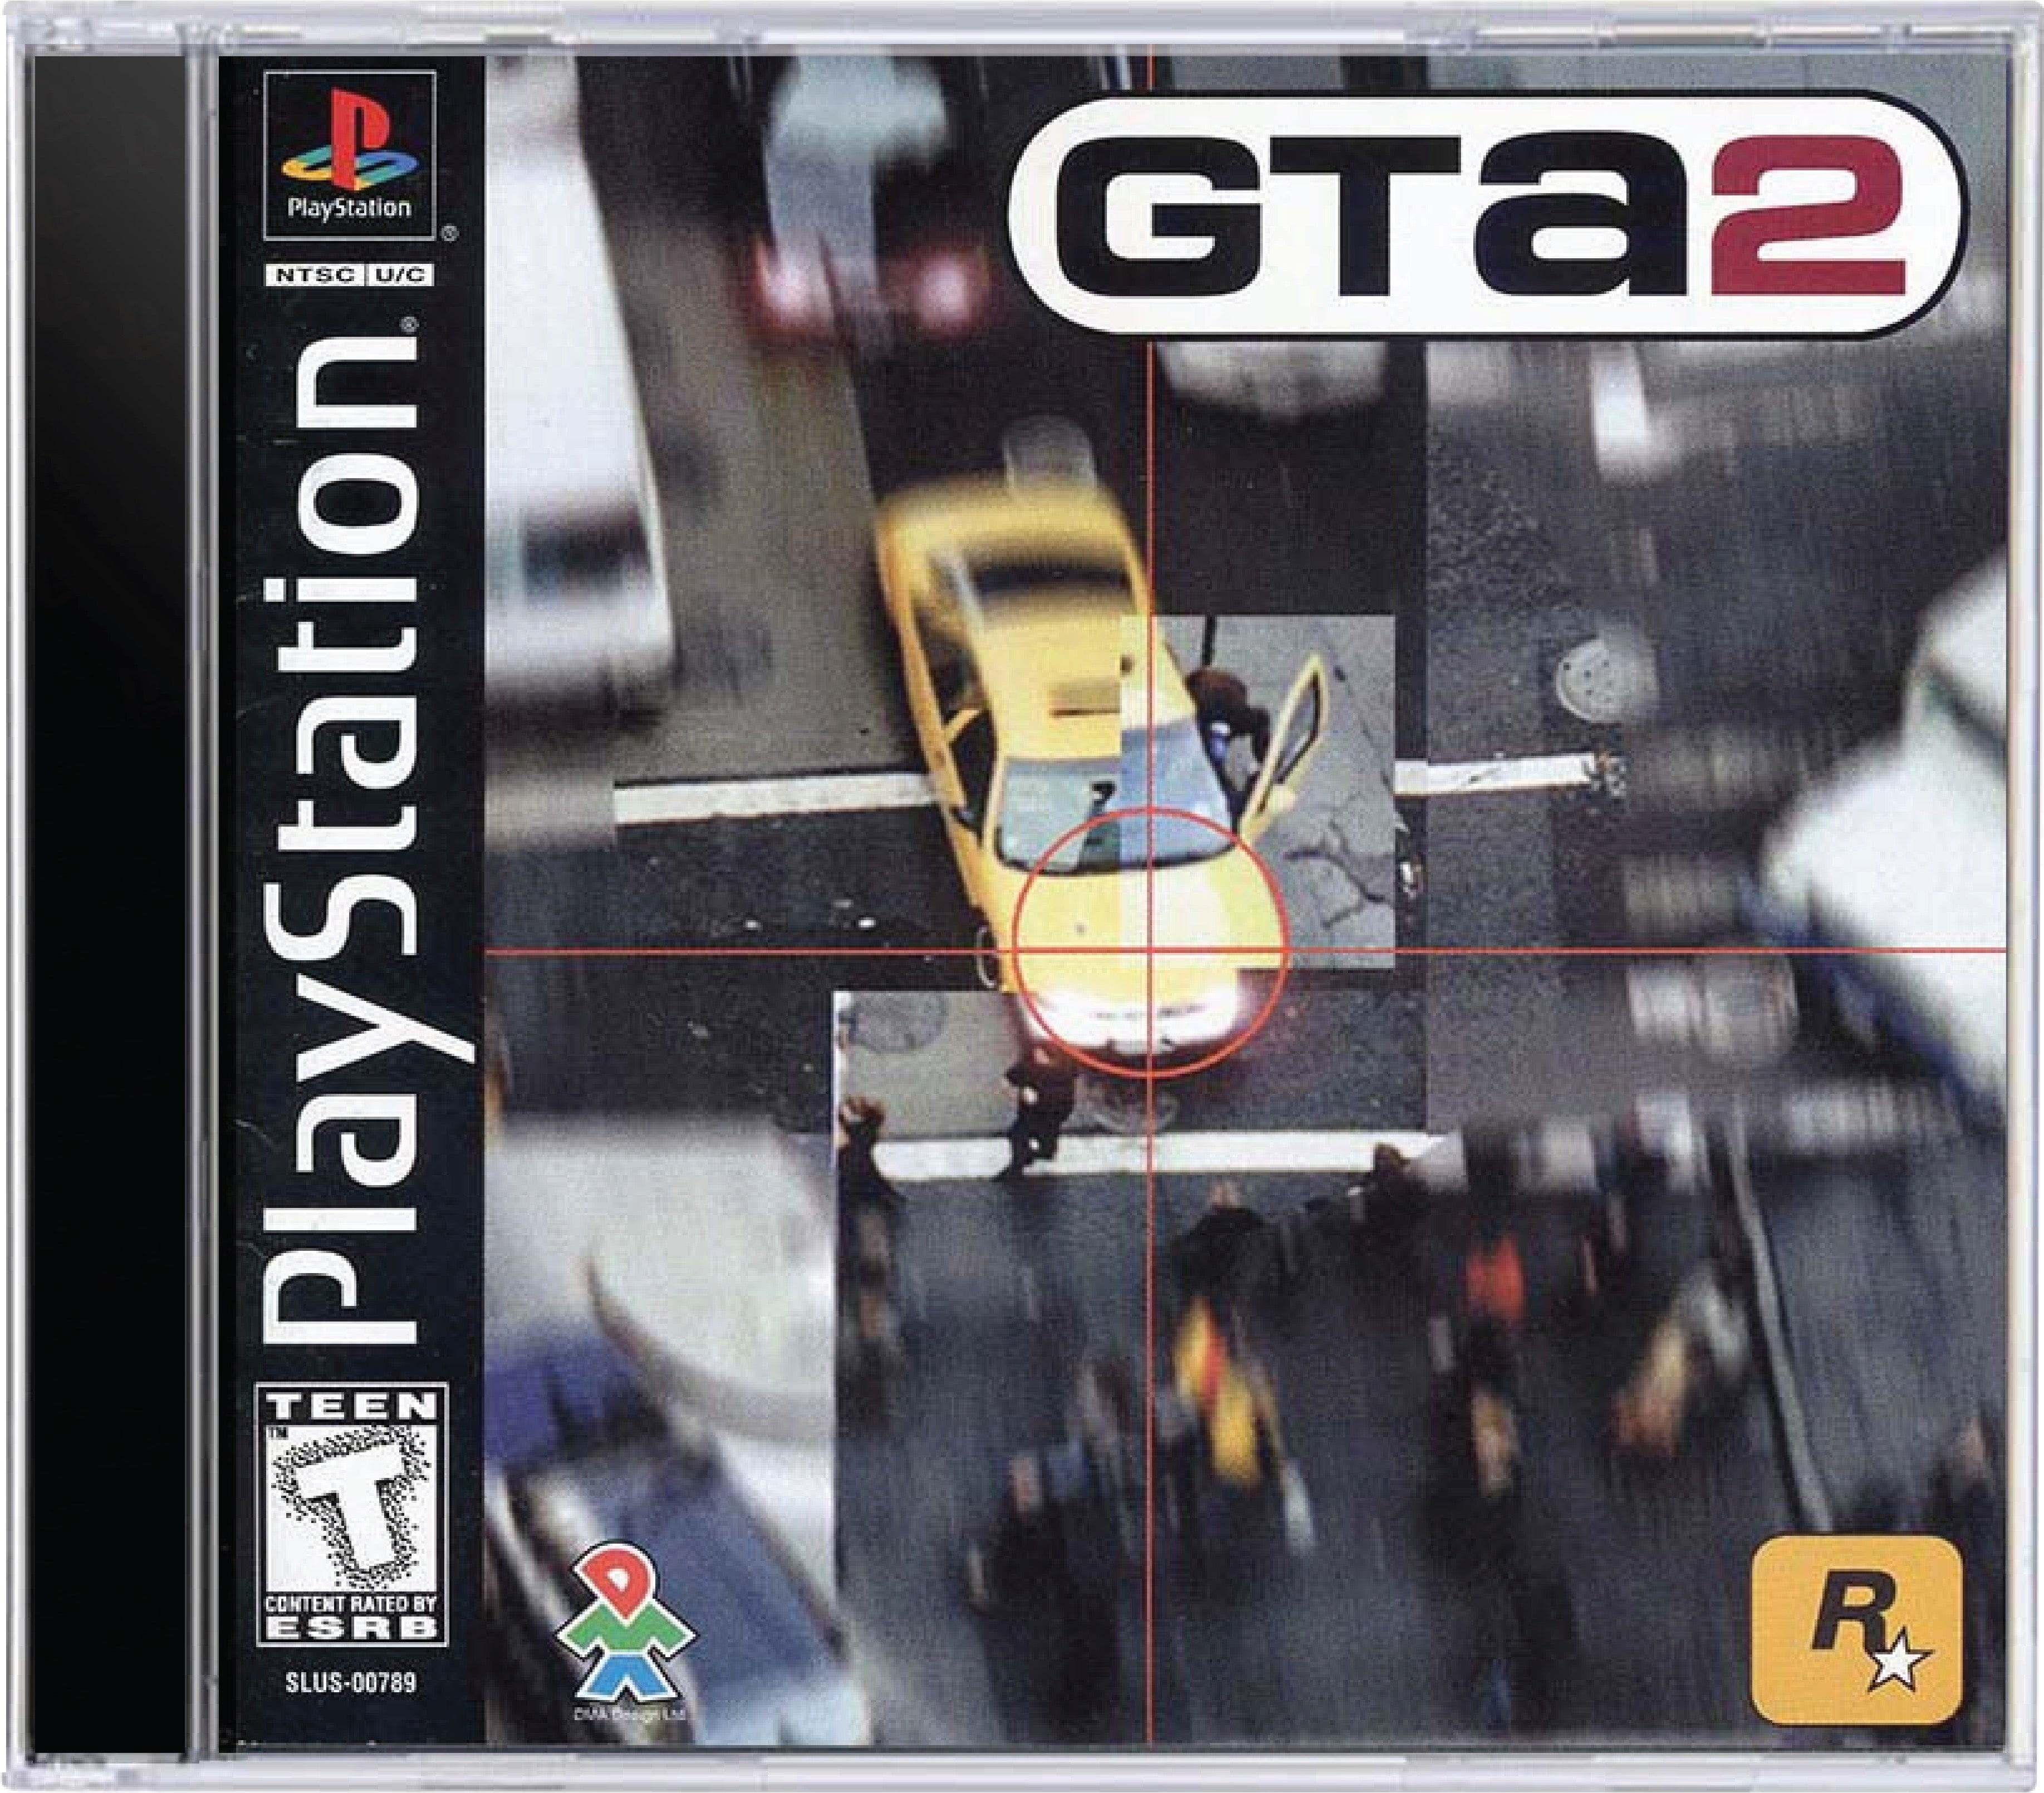 Grand Theft Auto GTA 2 Cover Art and Product Photo